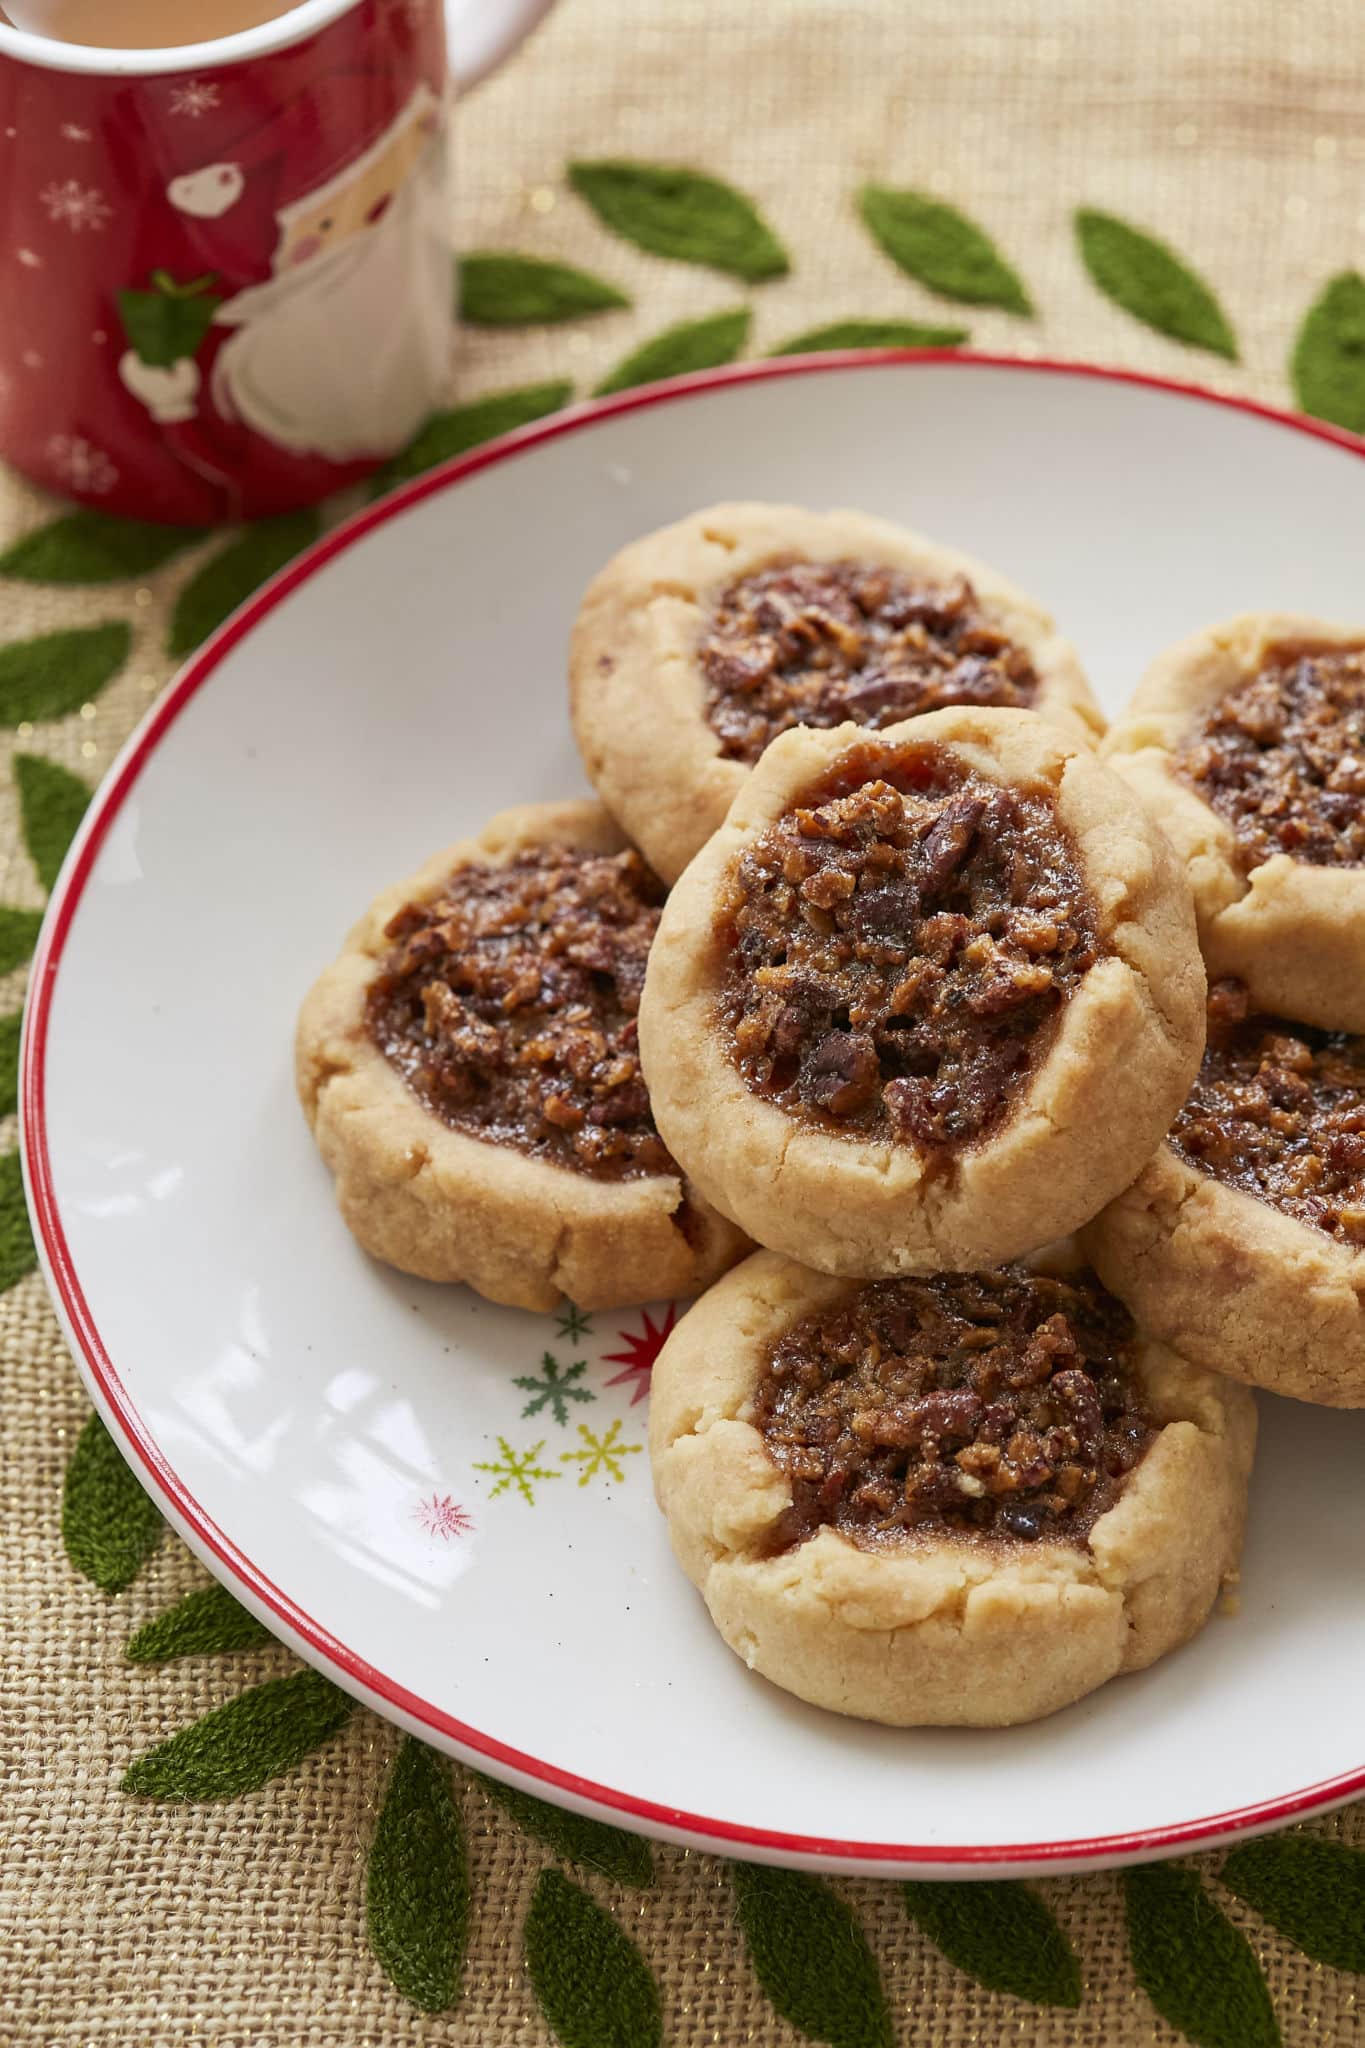 A dish of Pecan Pie Thumbprint Cookies, shortbread cookies filled with pecan pie filling, are served alongside a mug filled with hot chocolate.